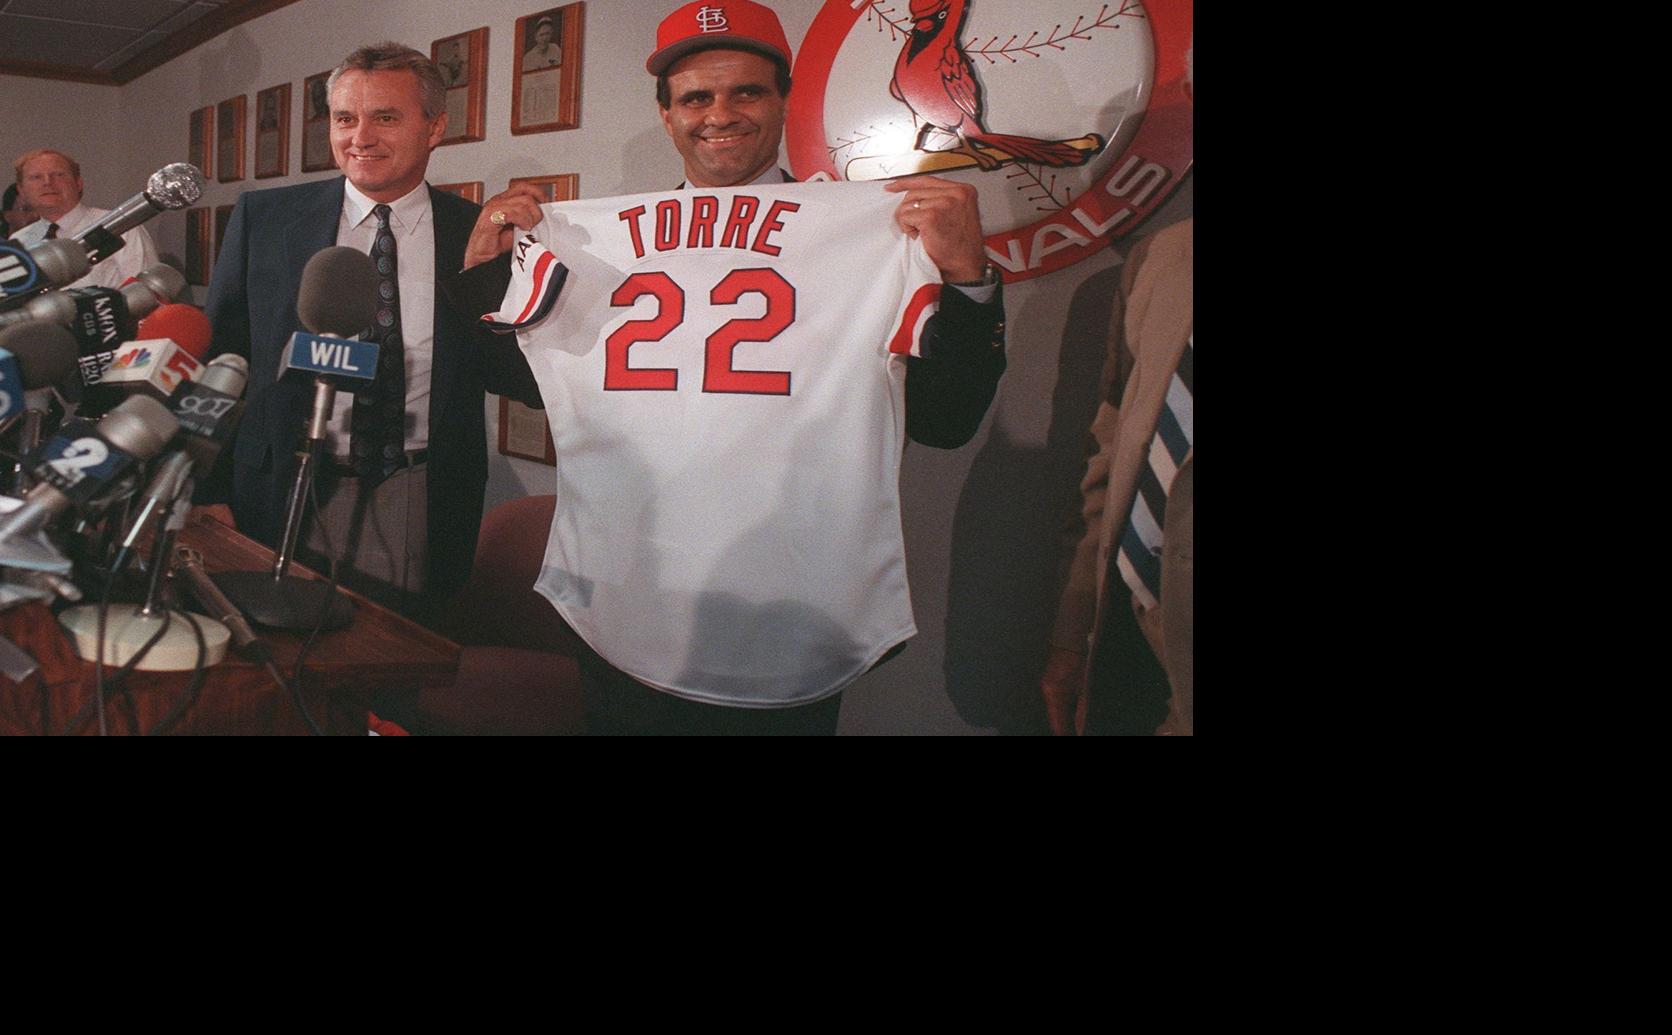 Joe Torre recalls strife for him and the Cardinals from the '94